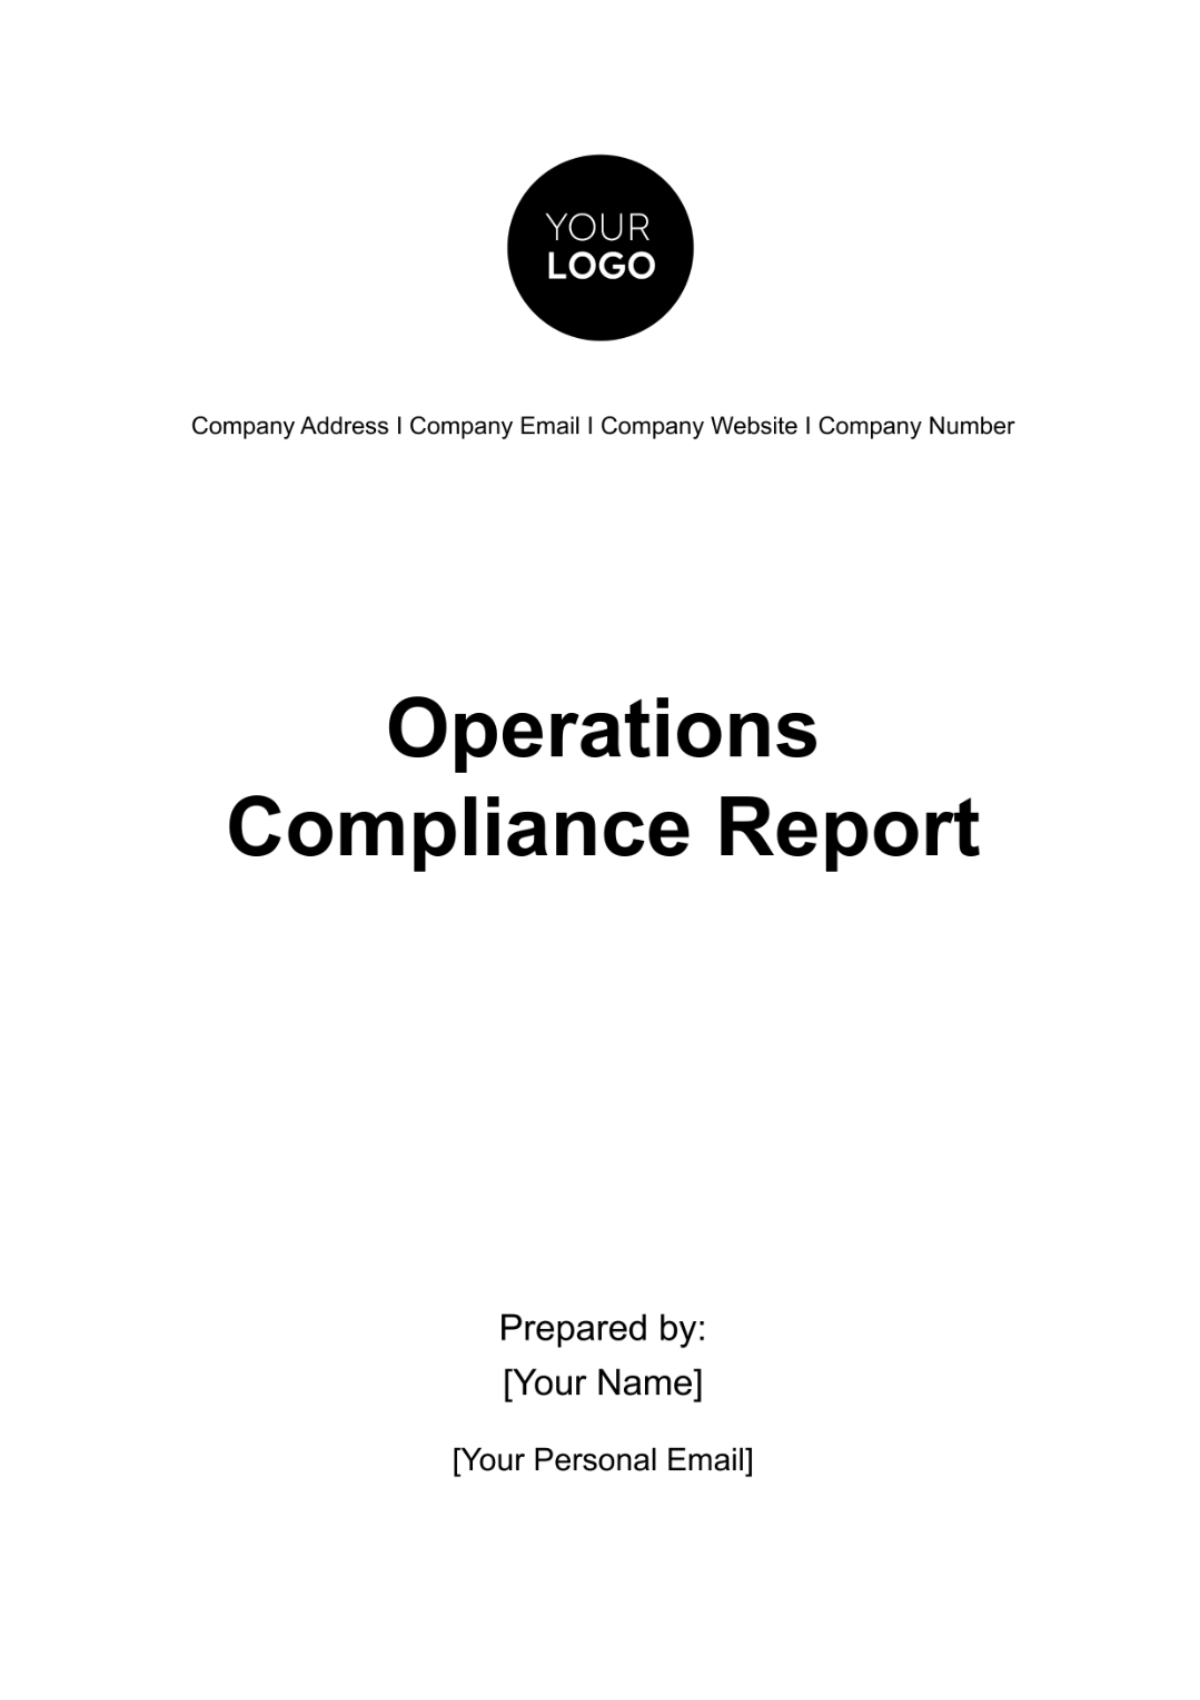 Operations Compliance Report Template